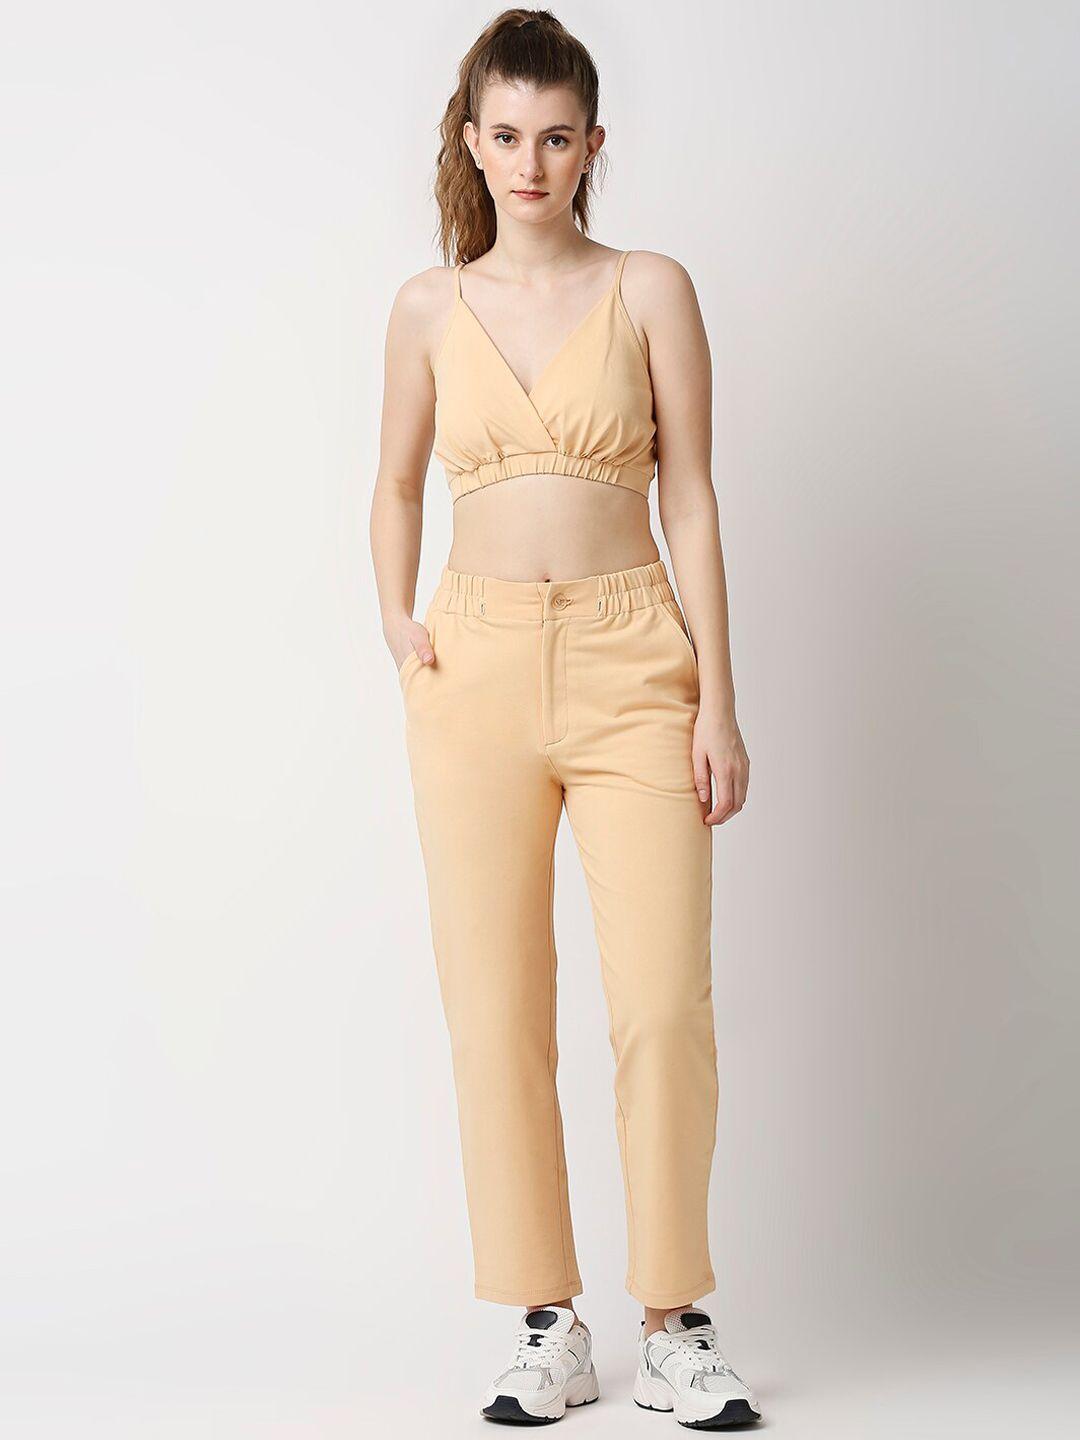 disrupt women bralette crop top with straight pants co-rd set